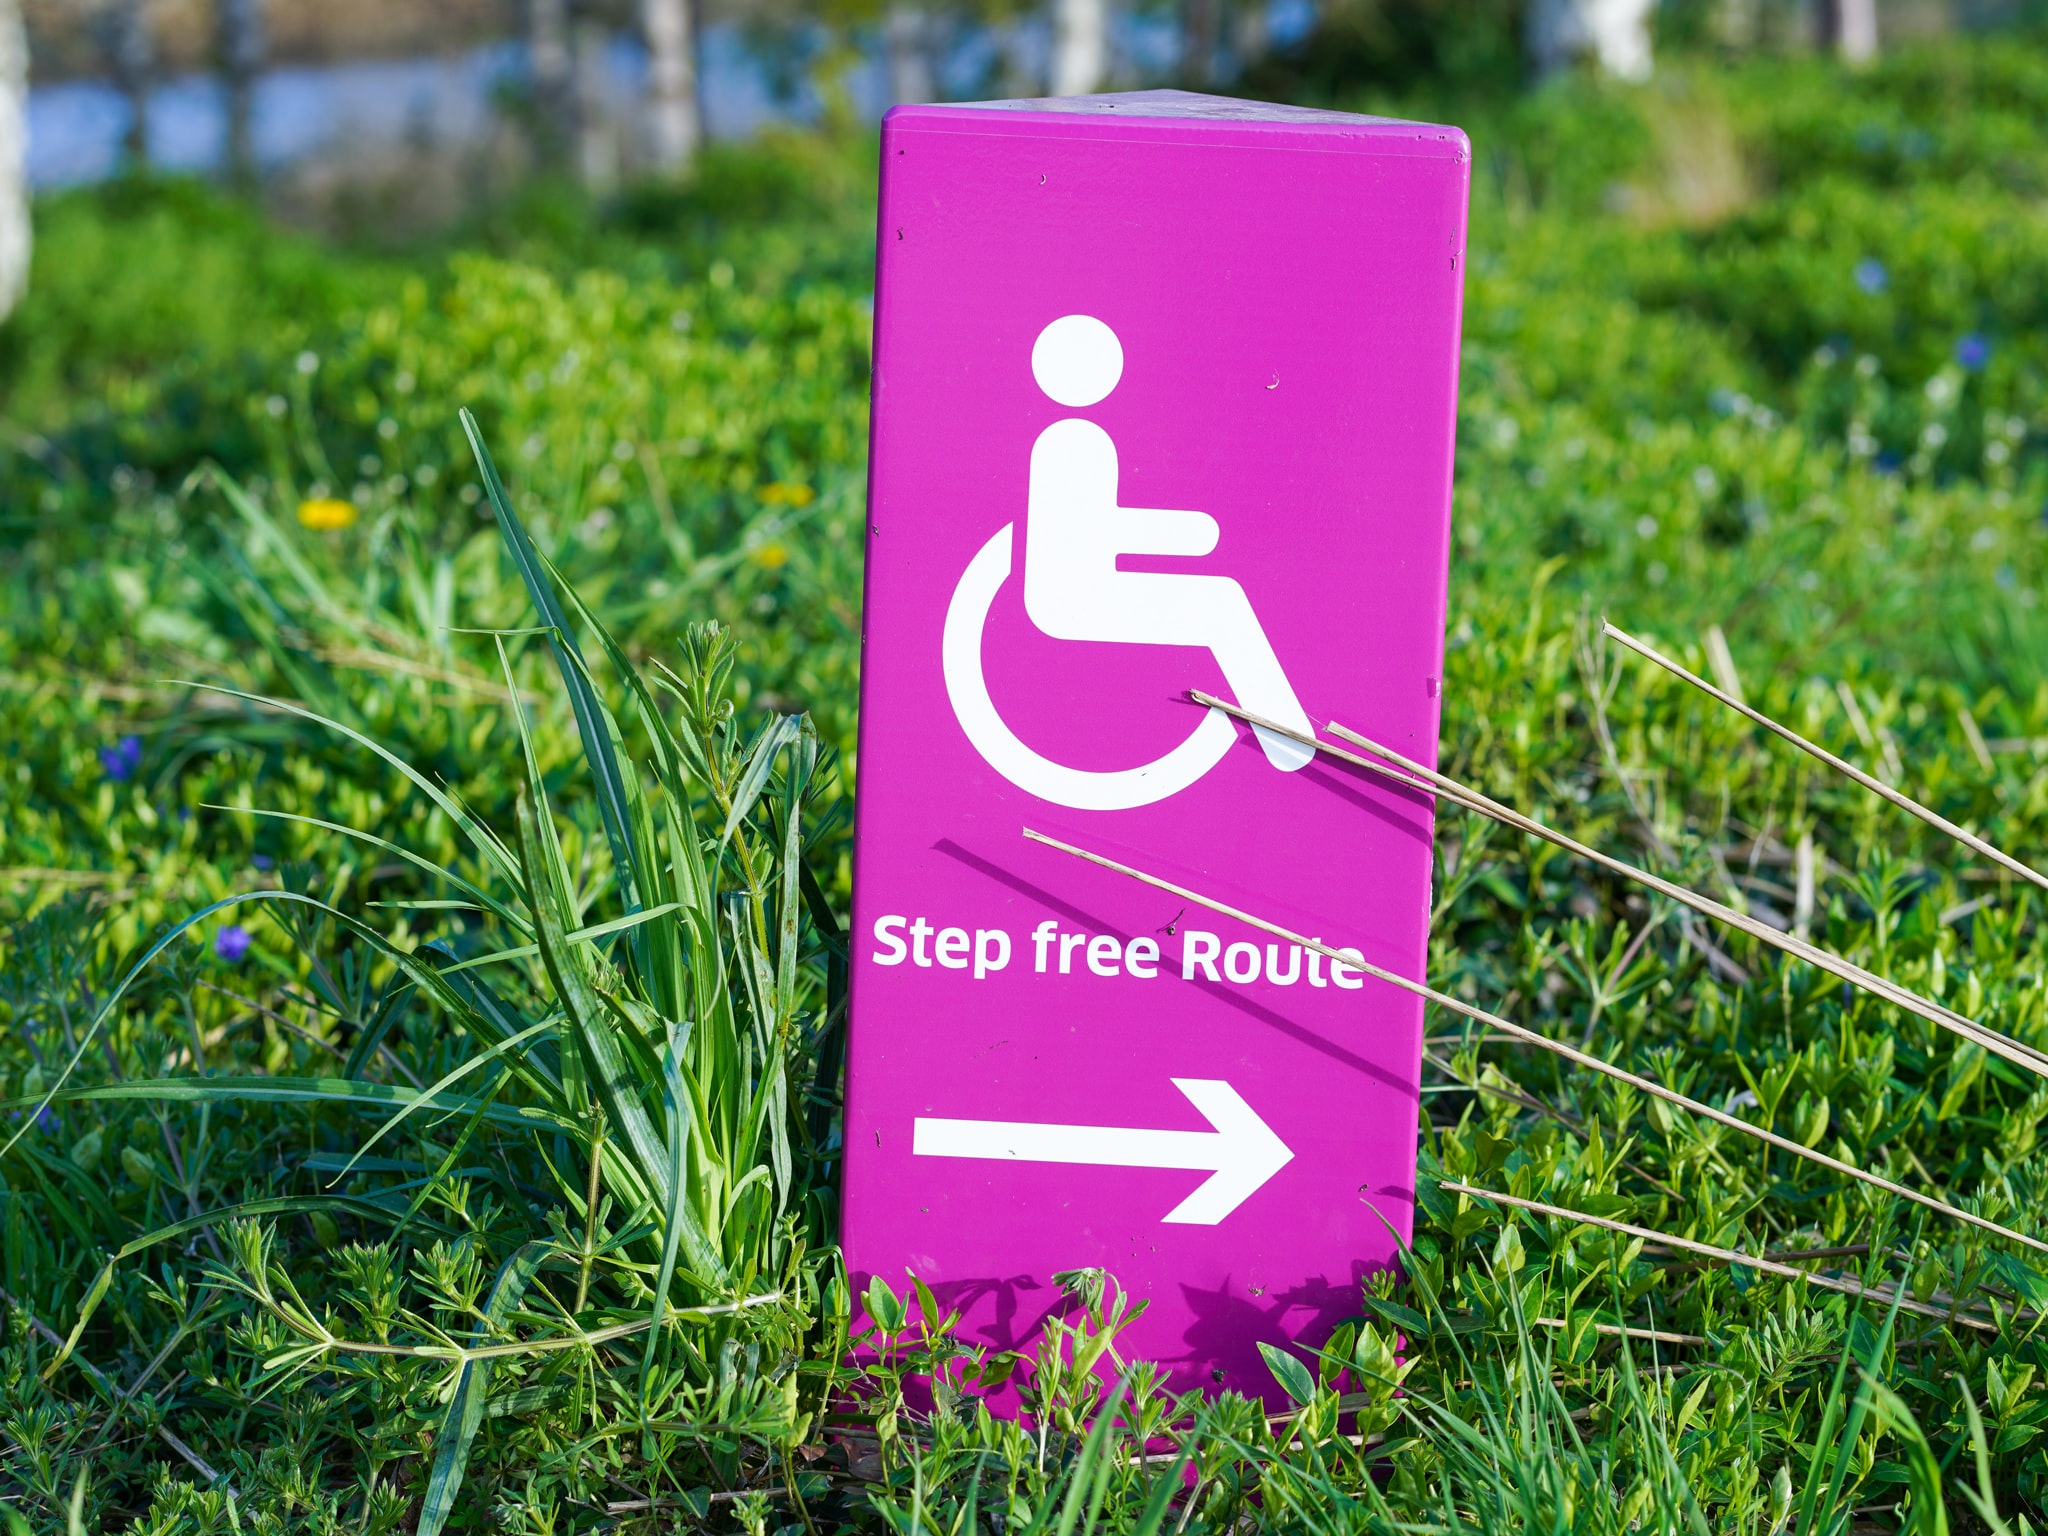 Photograph of pink box sign in grass. The sign has a white person-in-a-wheelchair-logo and the words 'Step Free Route' with an arrow pointing right.